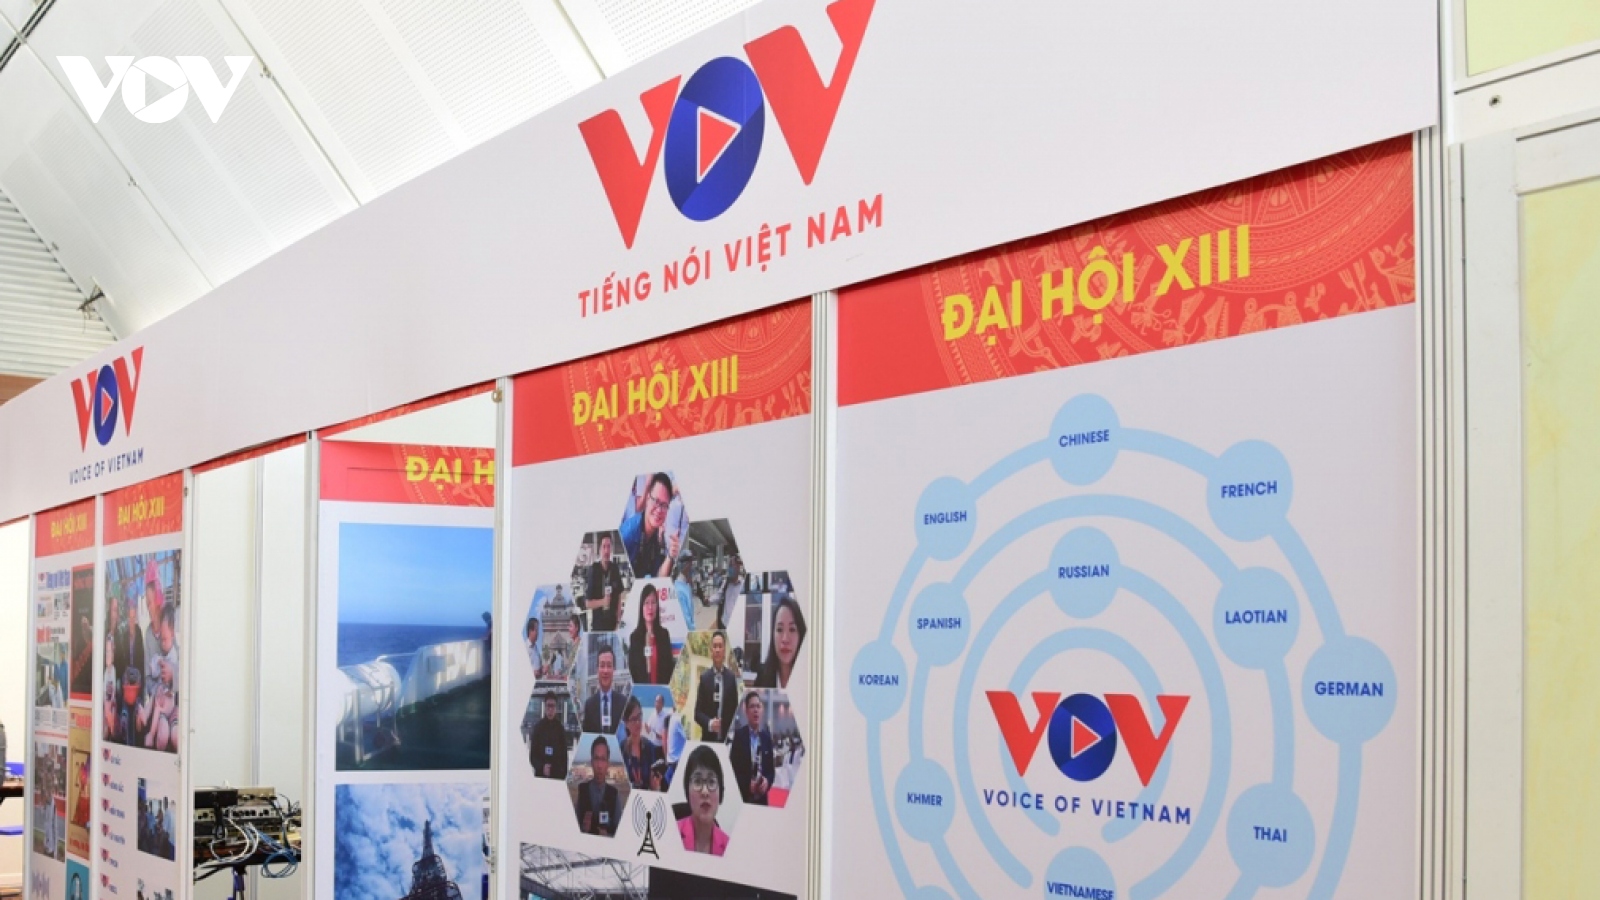 A view of VOV’s press centre area ahead of 13th National Party Congress